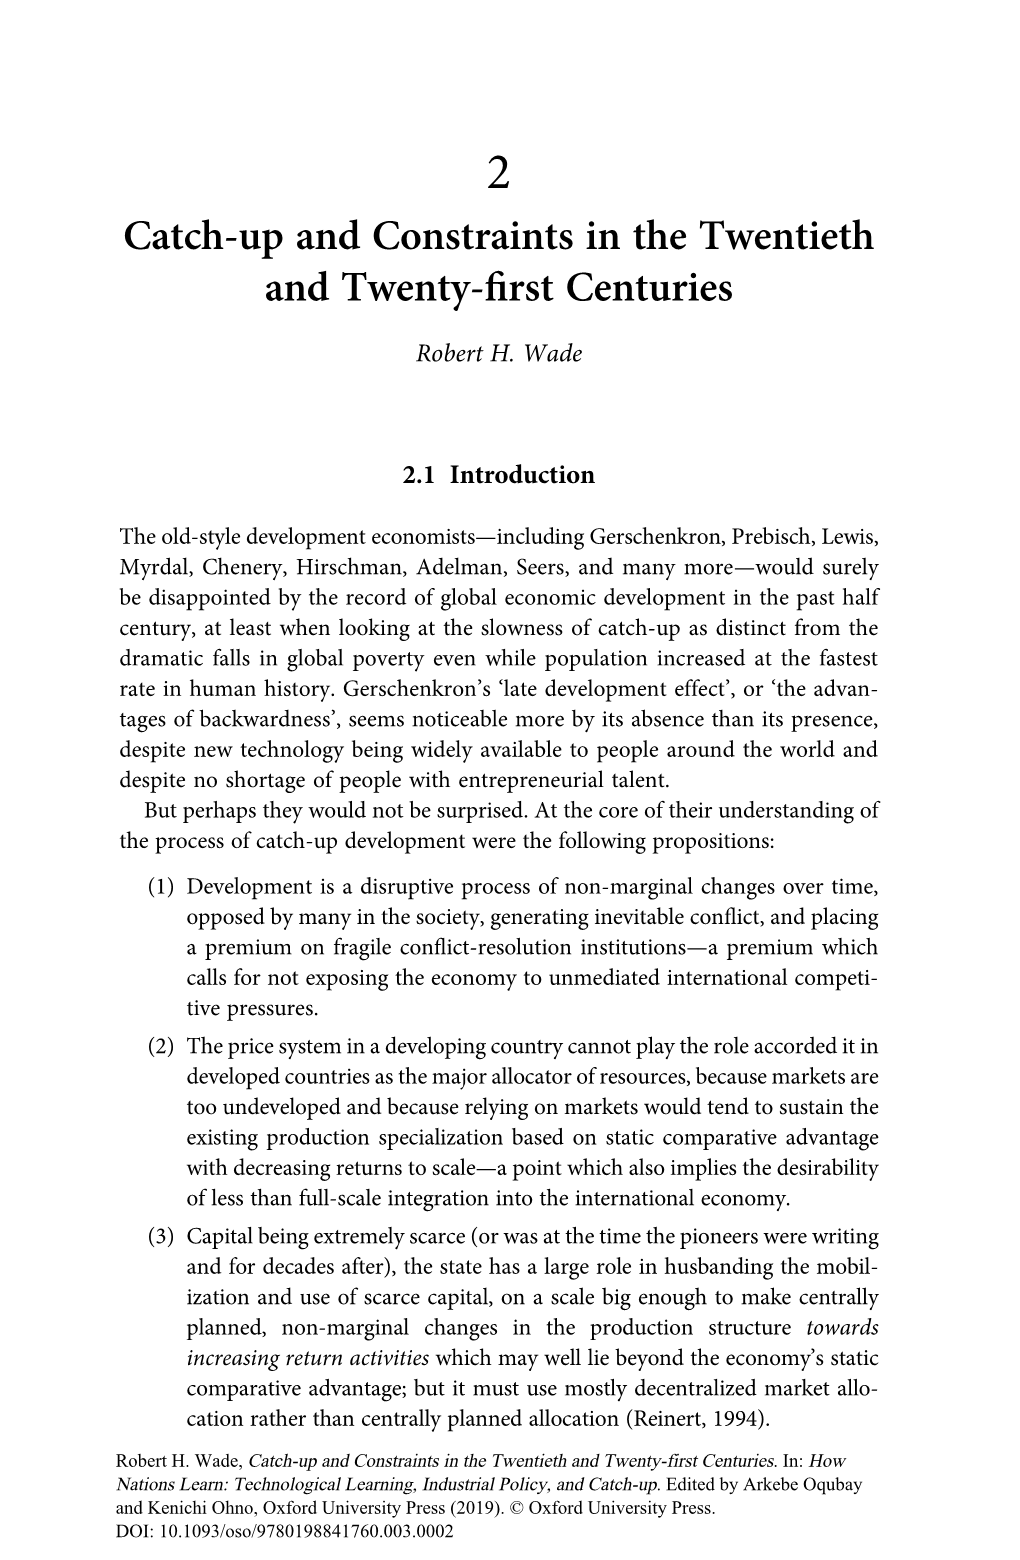 Catch-Up and Constraints in the Twentieth and Twenty-First Centuries